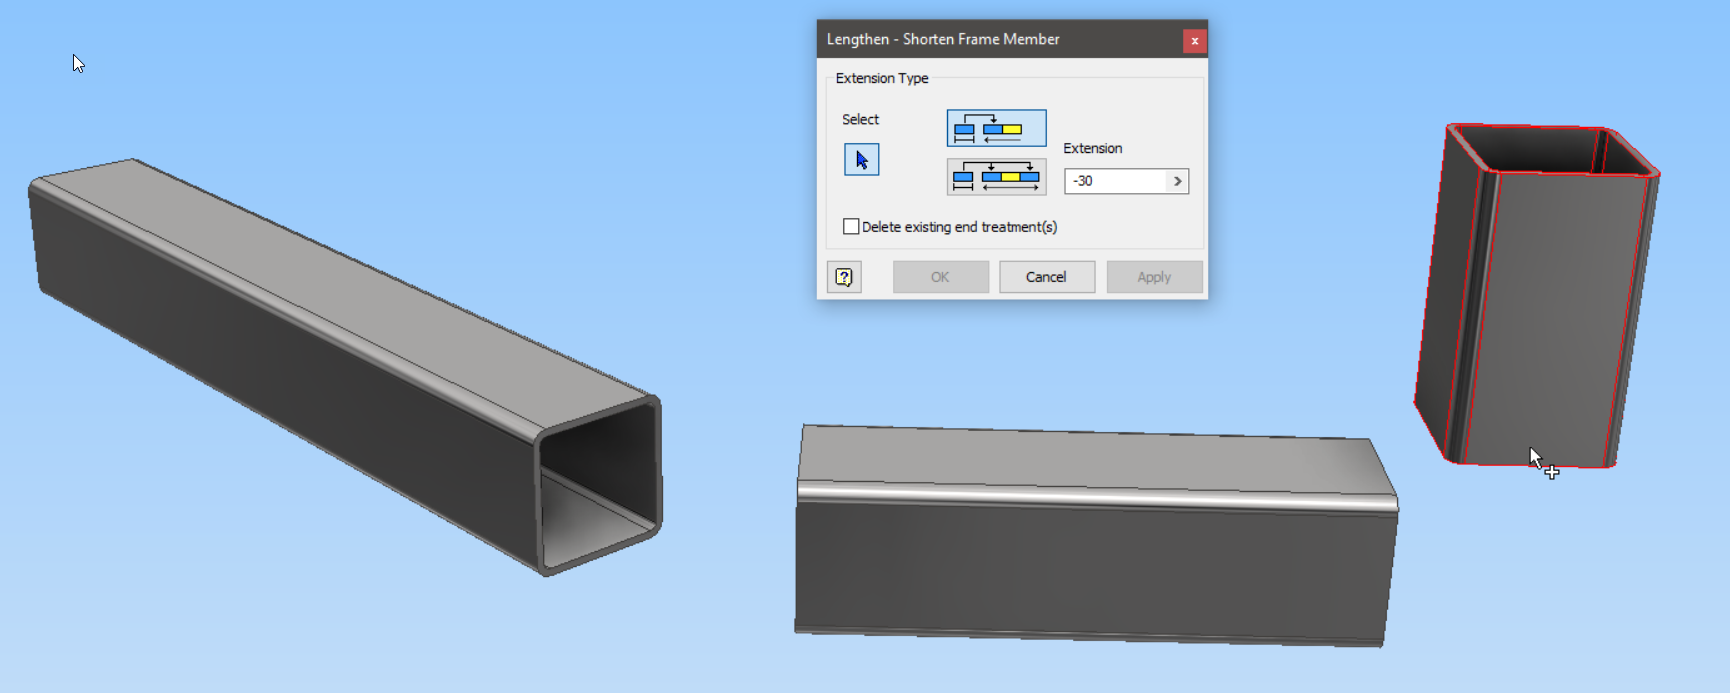 A screenshot of a steelwork model in Inventor software 